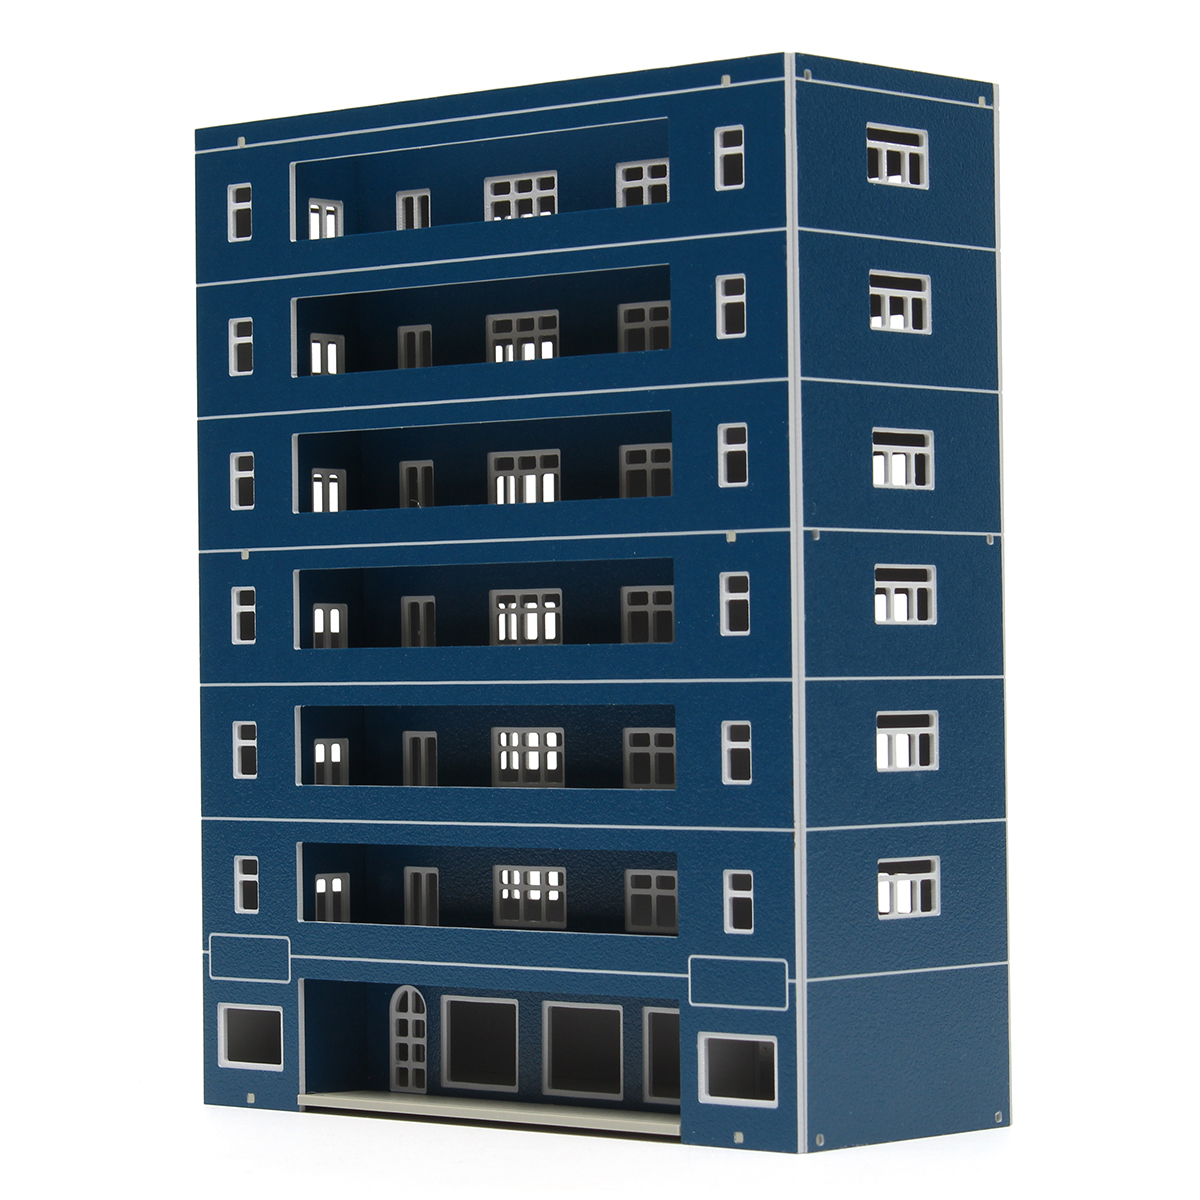 Blue-Plastic-Apartment-Classroom-Scenary-Layout-Model-Toy-For-GUNDAM-Building-1092284